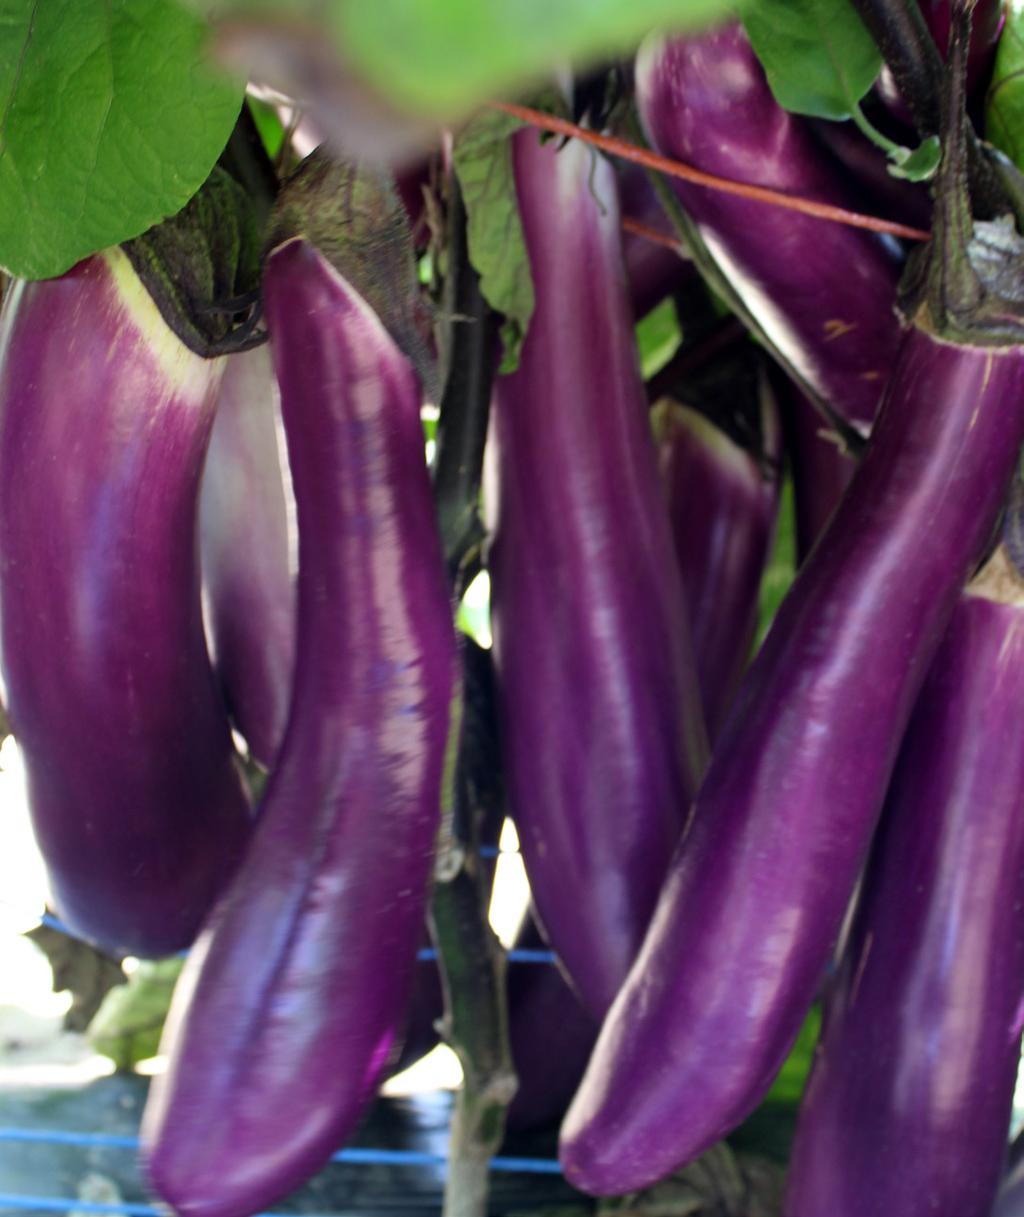 Eggplant irrigation Irrigation is an essential element of a successful vegetable production operation, especially during hot and dry summers.